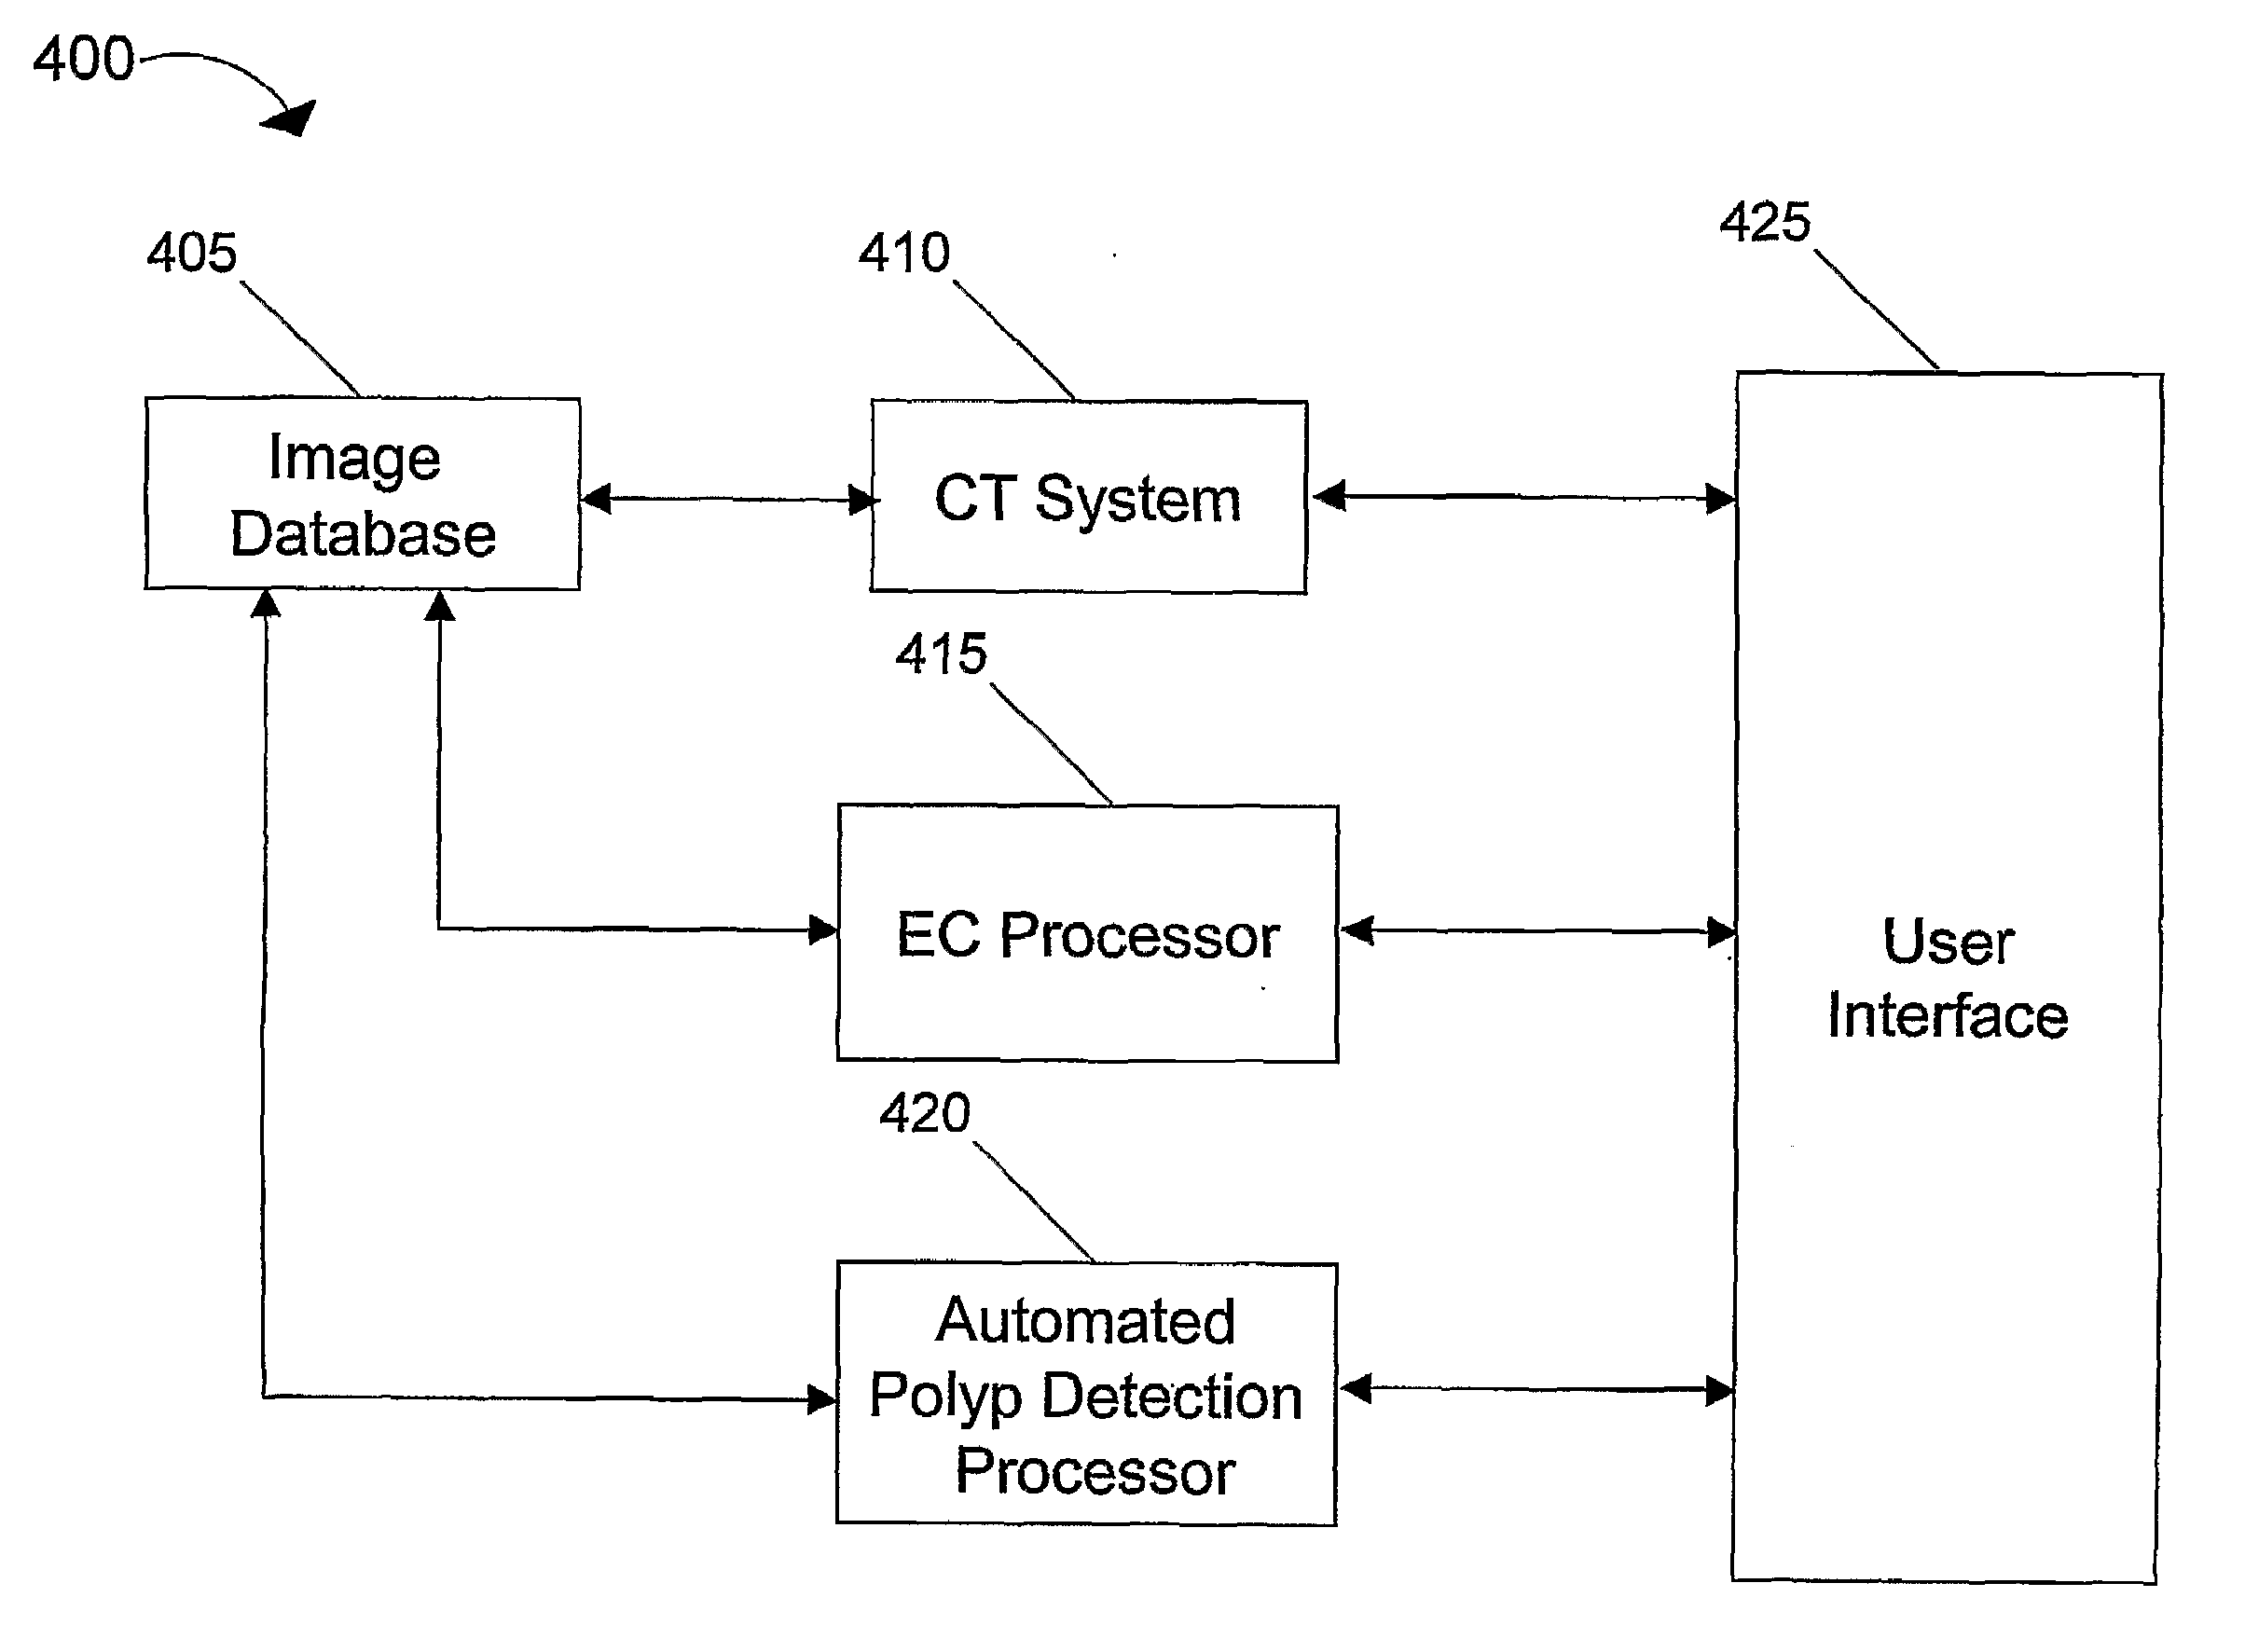 Structure-analysis system, method, software arrangement and computer-accessible medium for digital cleansing of computed tomography colonography images